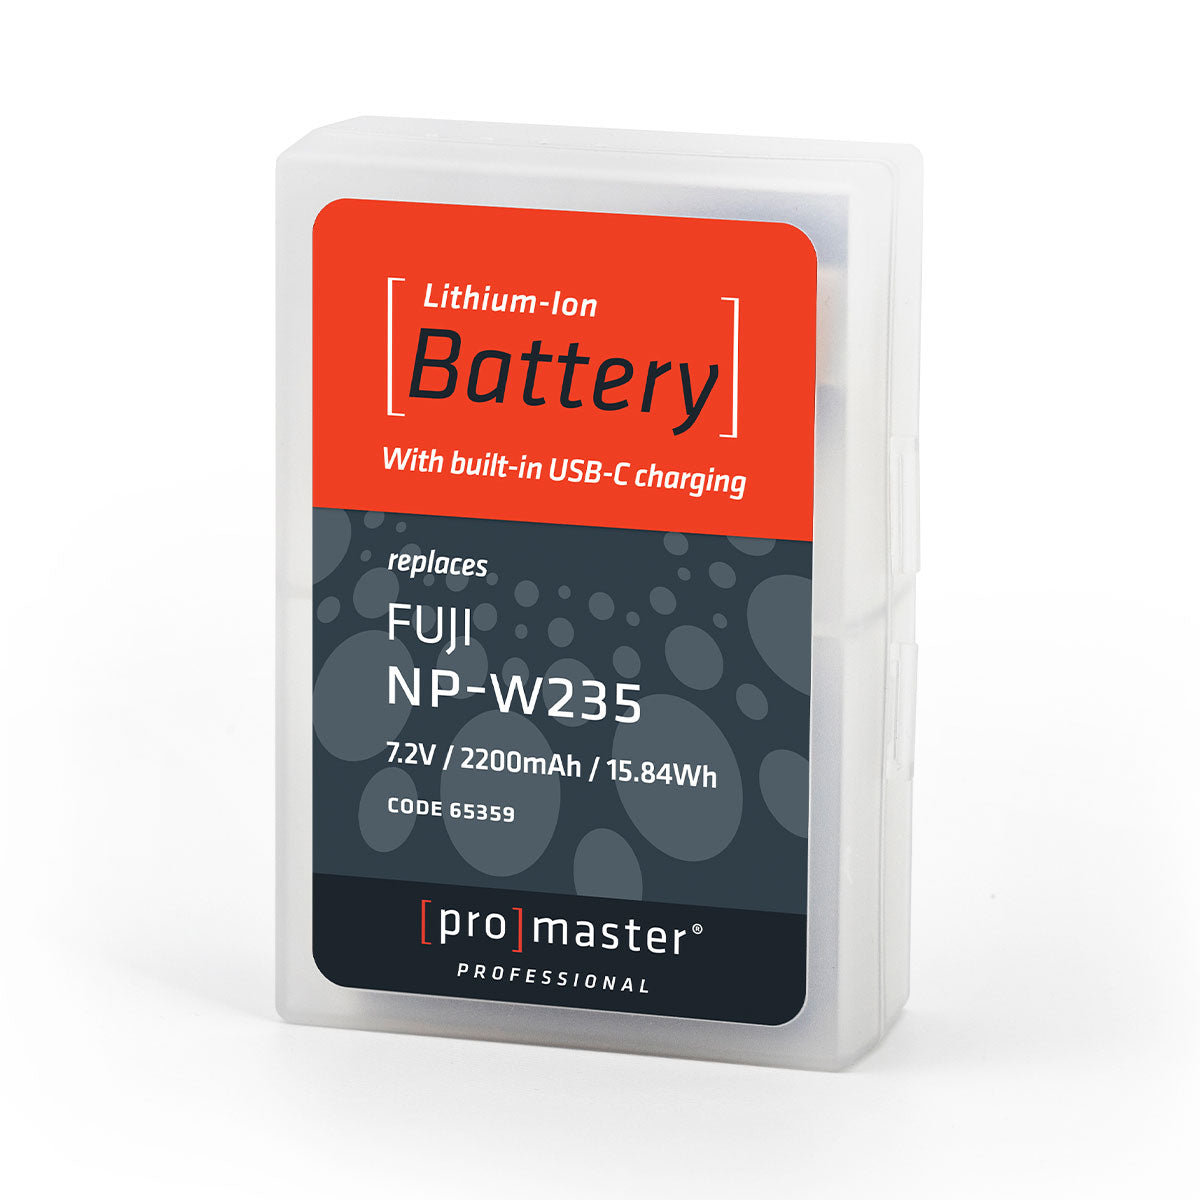 ProMaster NP-W235 Li-ion Battery with USB-C Charging for Fuji